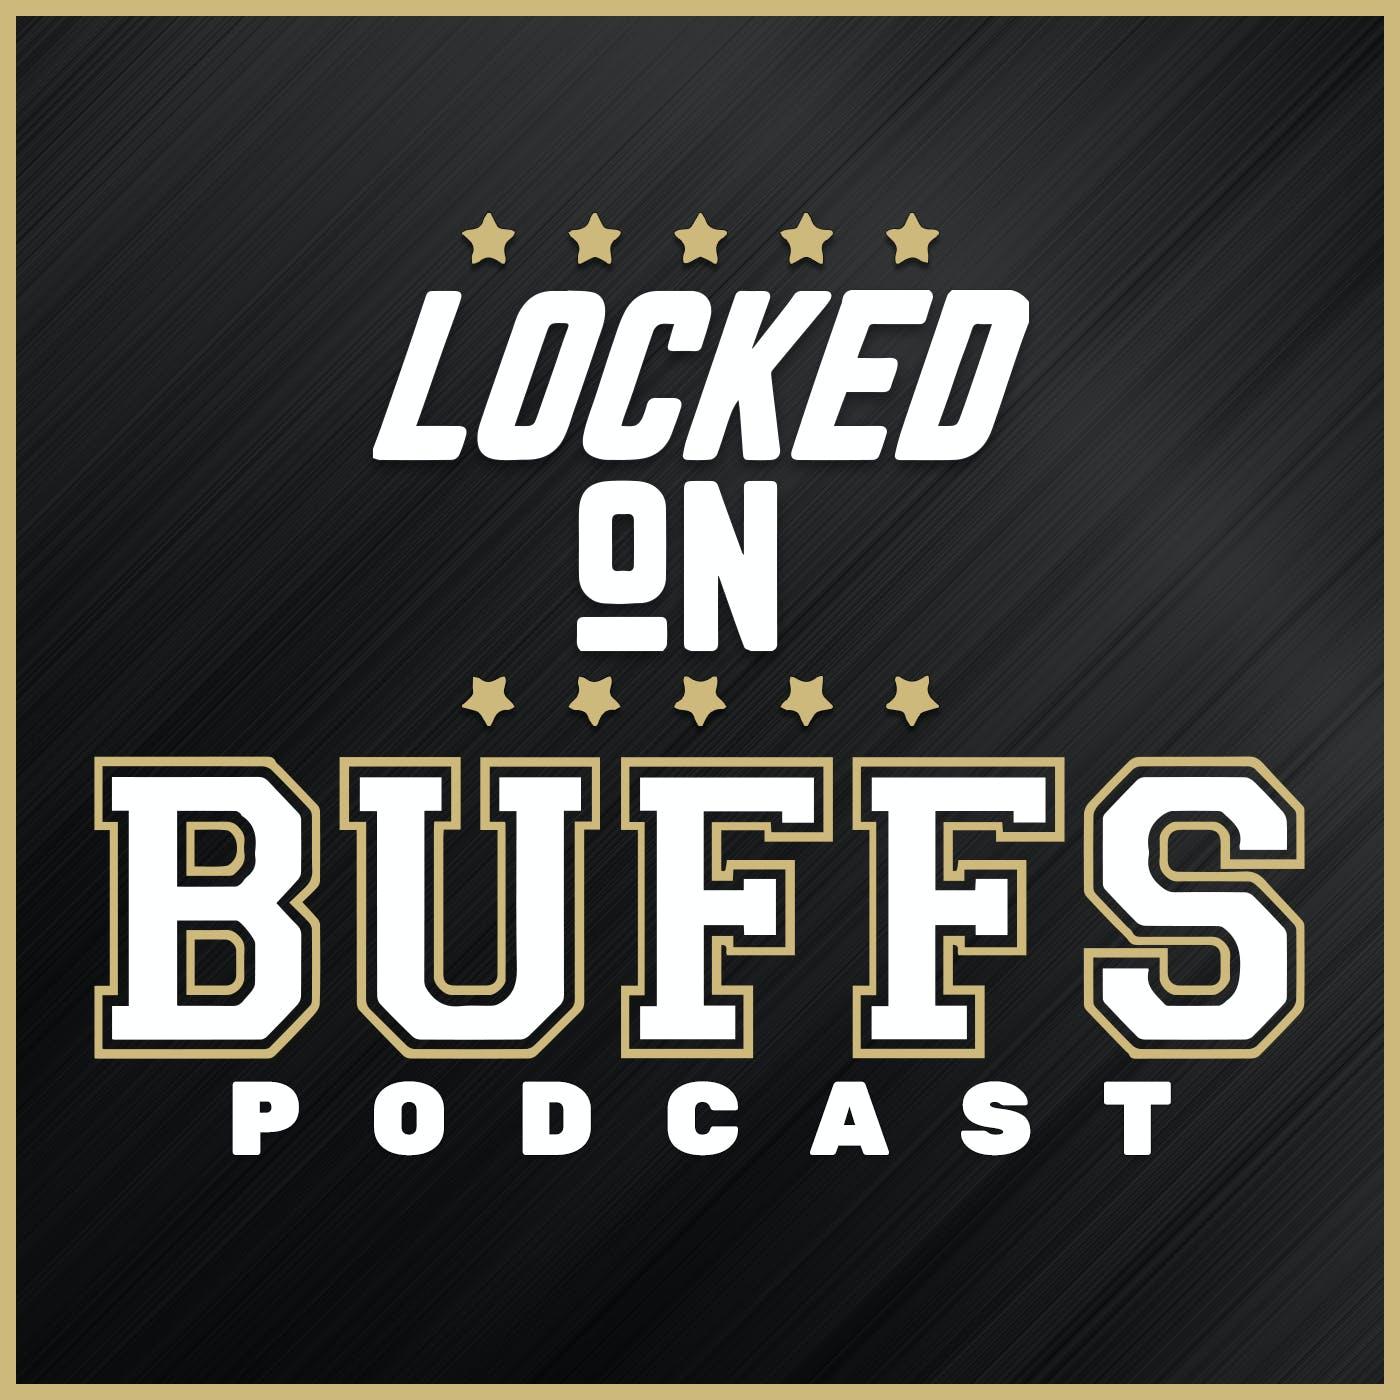 Show poster of Locked On Buffs - Daily Podcast on Colorado Football and Basketball